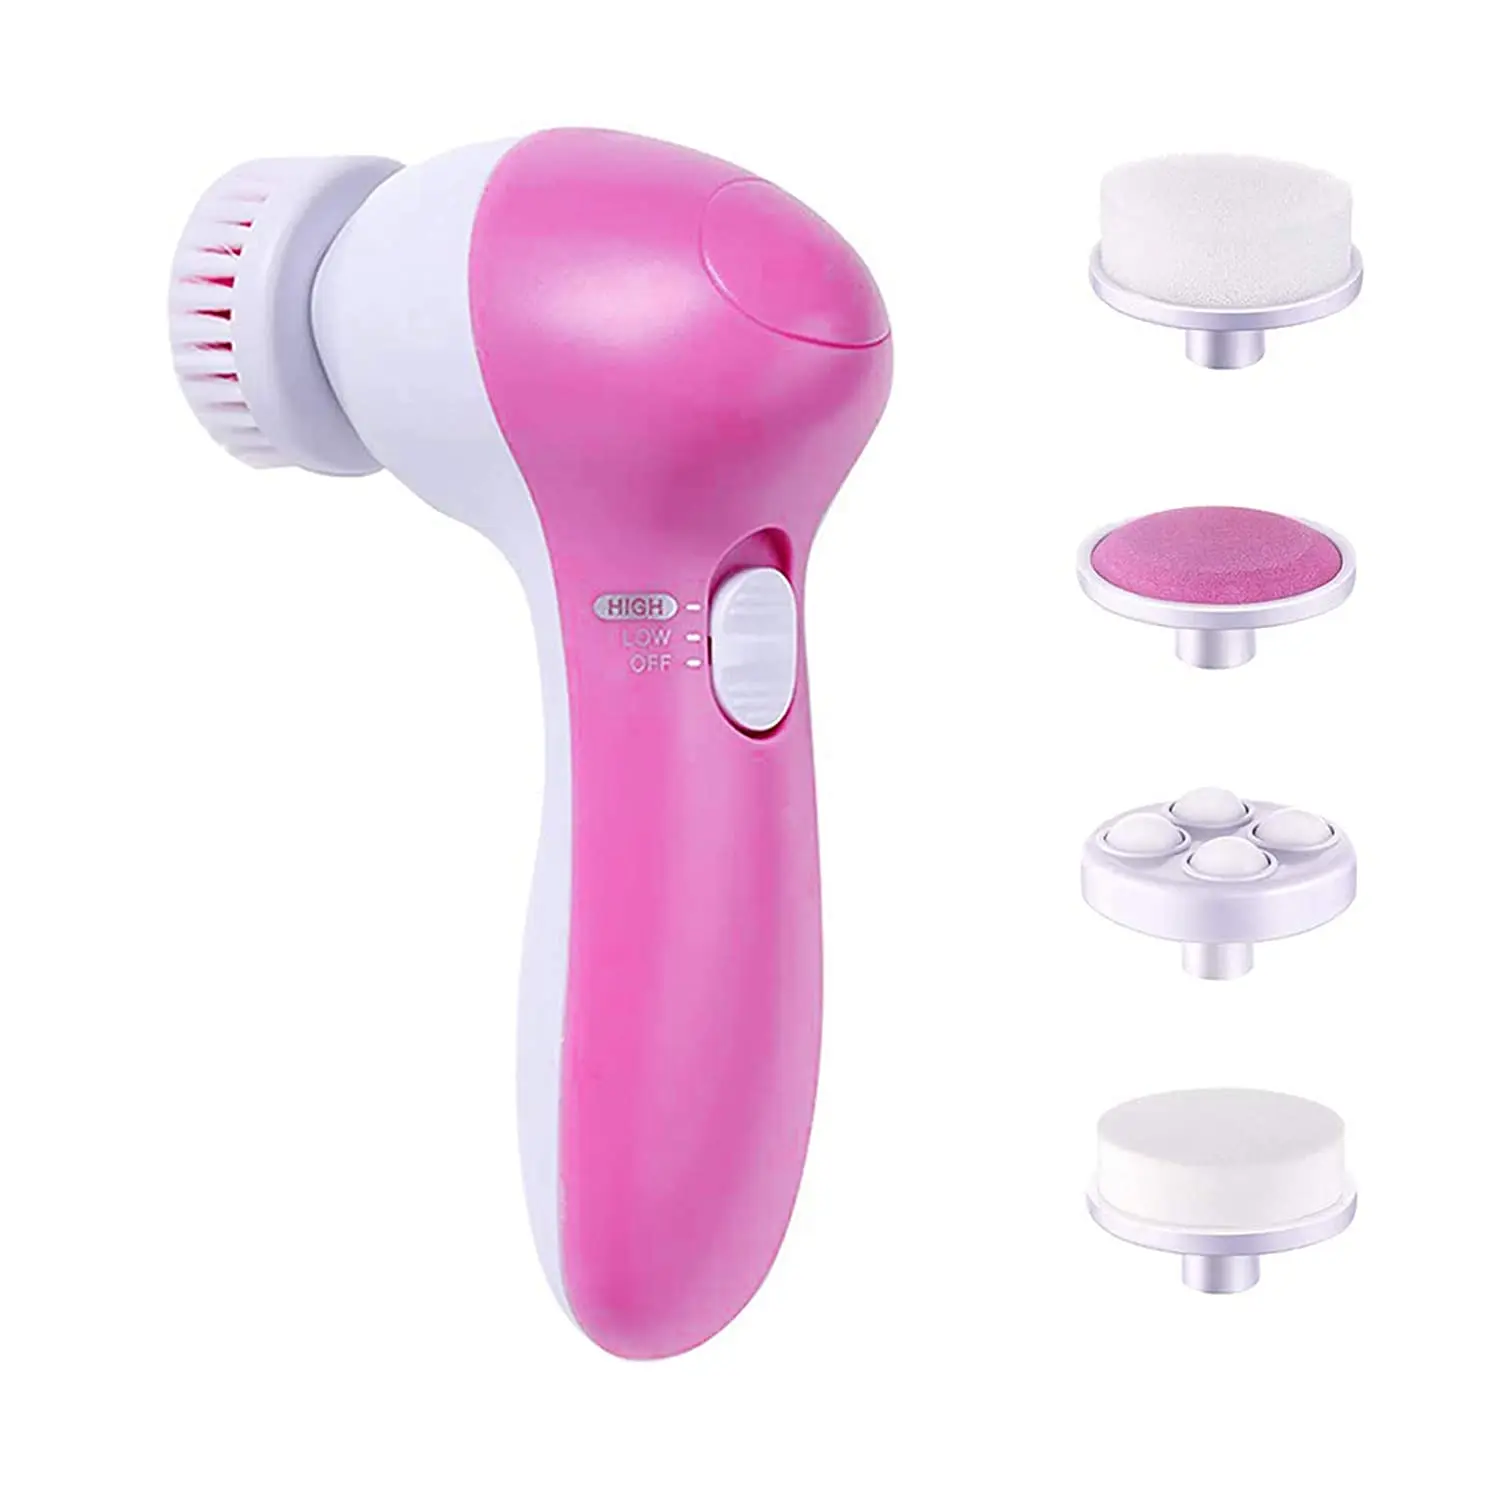 Facial Cleansing Brush Waterproof Face Spin Brush Set With 5 Brush Heads Gentle Exfoliating & Removing Blackhead Deep Cleansing silicone rub back brush bathroom non slip wash foot pad massage shower mat with sucker bath massage foot exfoliating brush pad